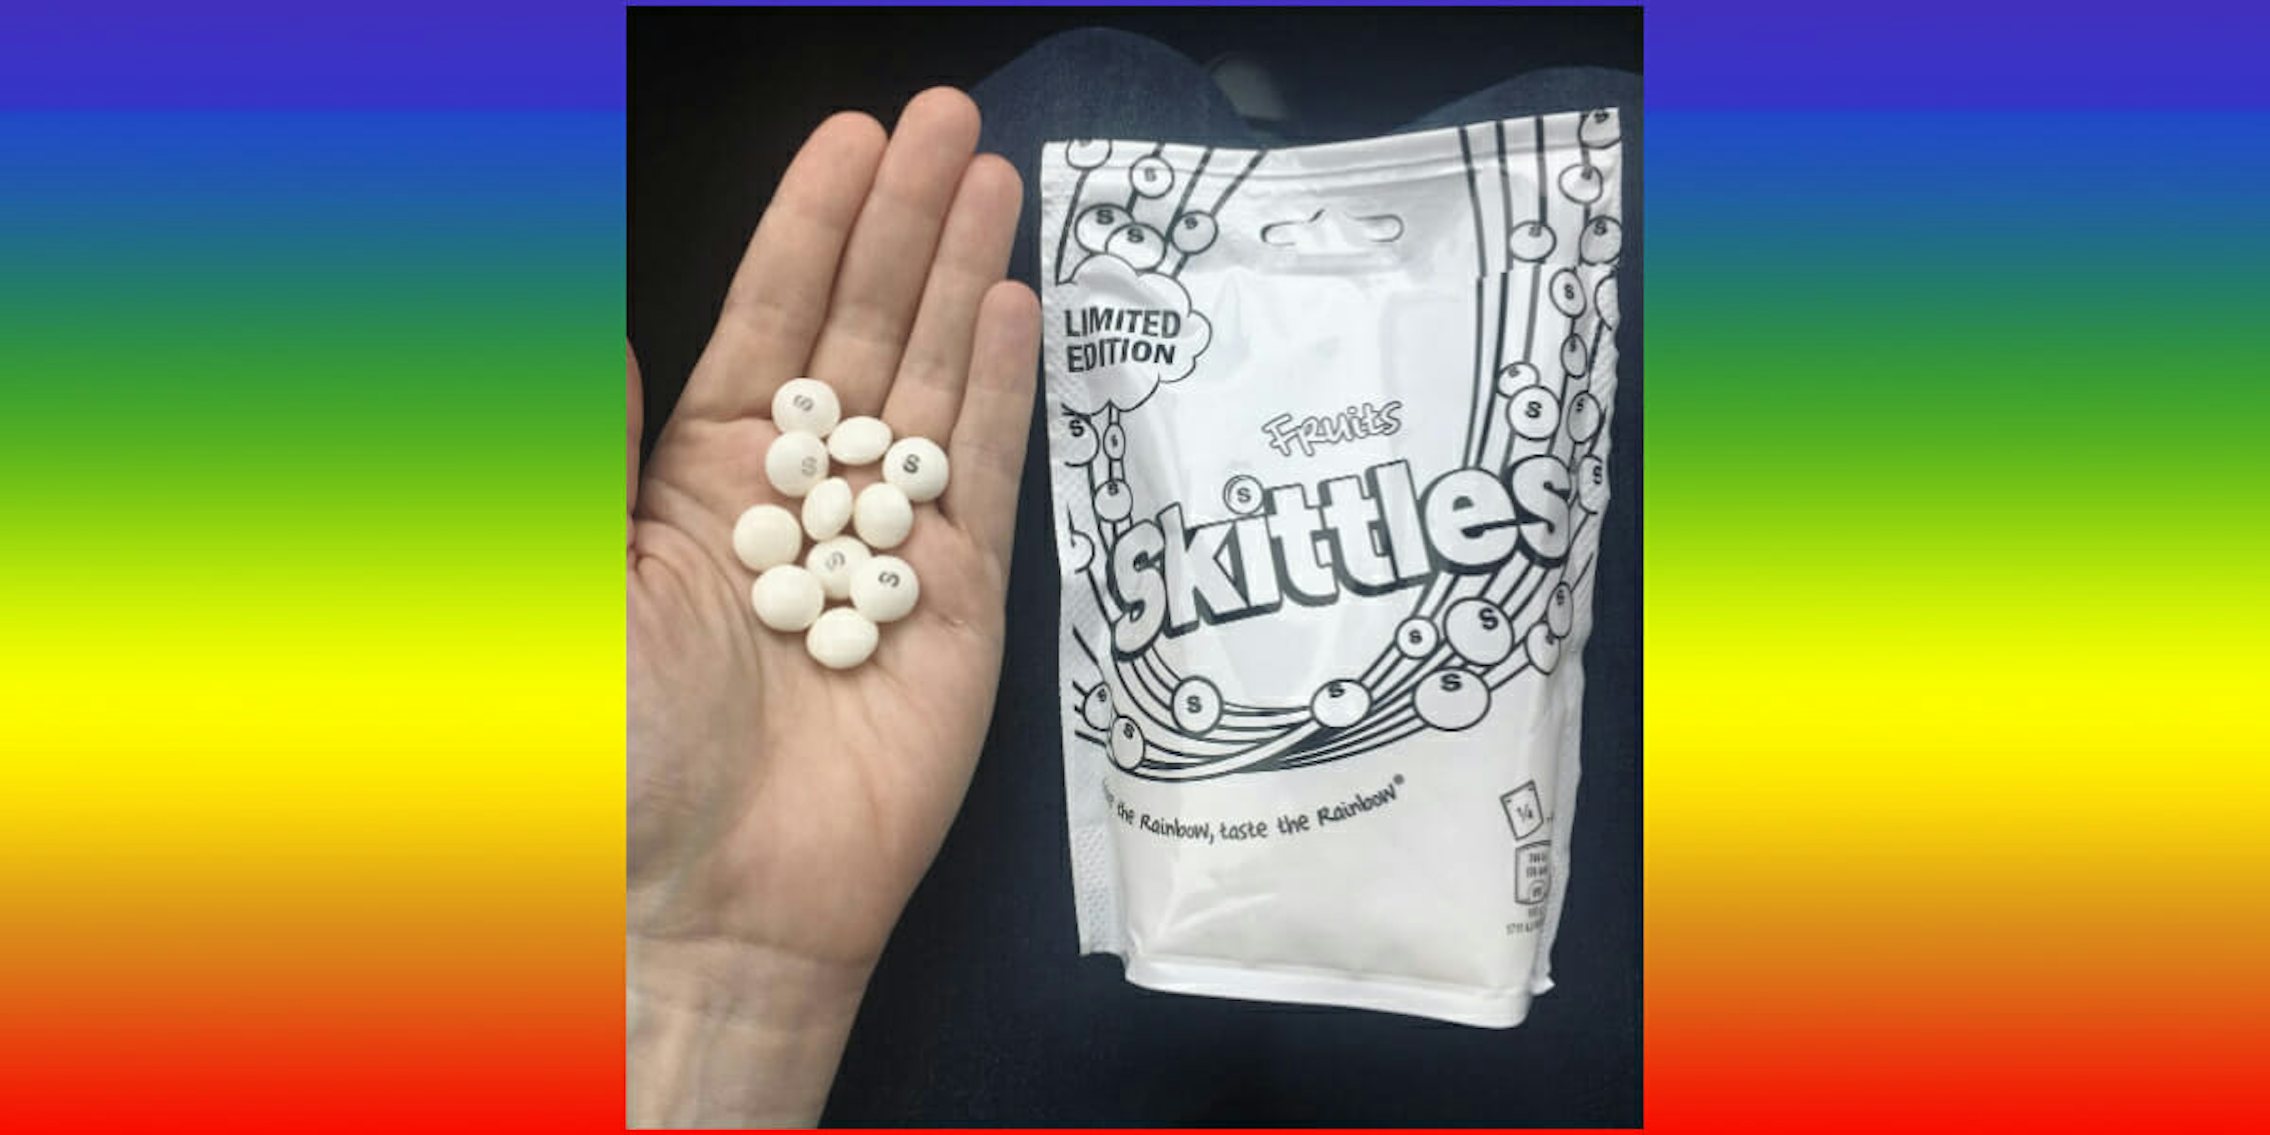 Mars Releases LimitedEdition White Skittles for LGBTQ Pride Month